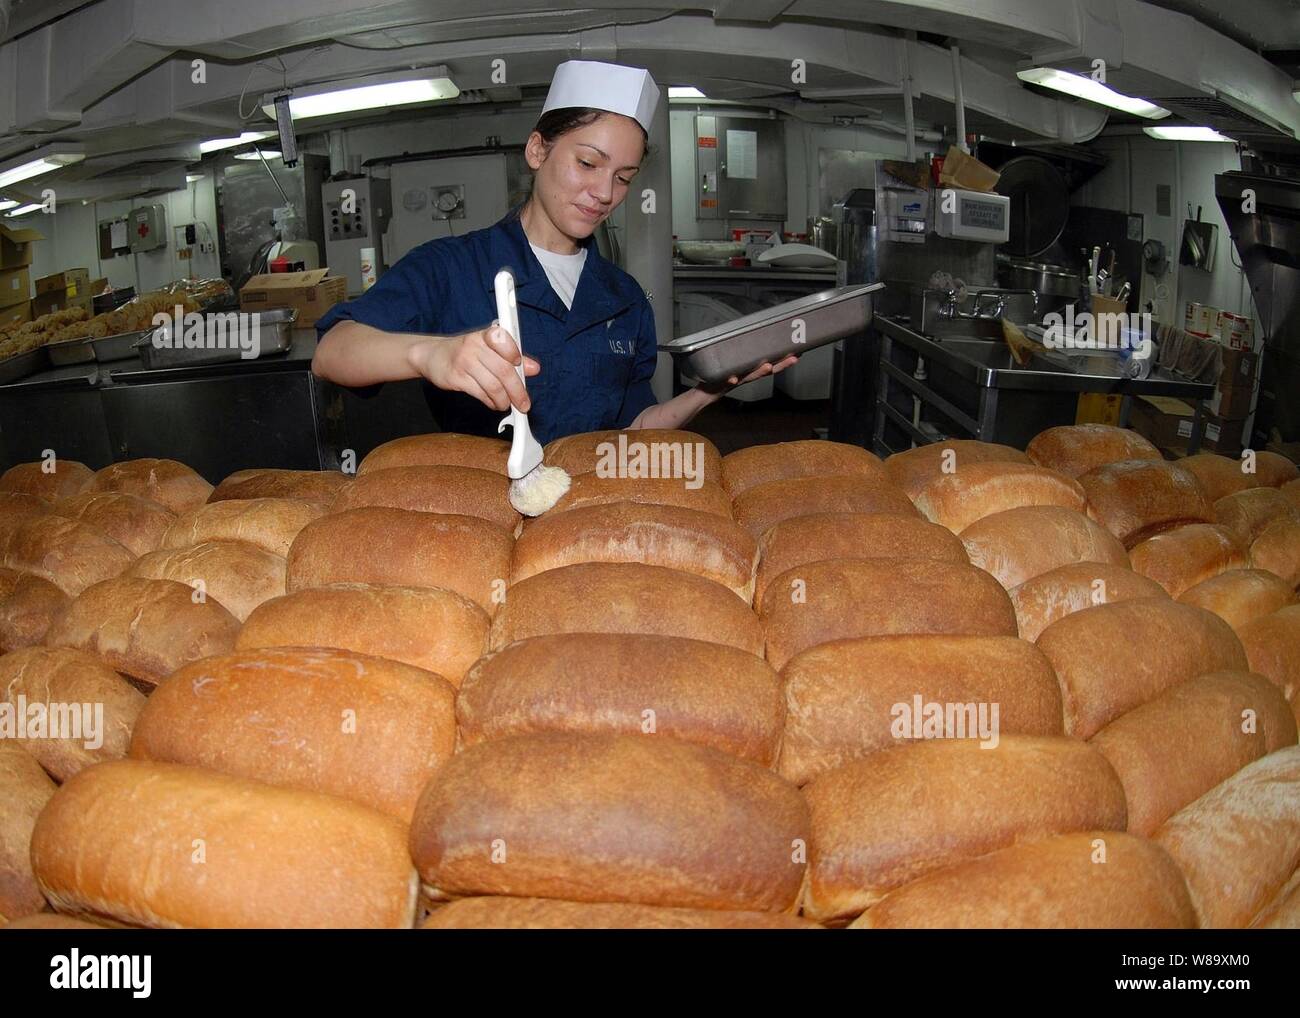 U.S. Navy Seaman Samantha Garza butters loaves of freshly baked bread in the bakeshop aboard the aircraft carrier USS George Washington (CVN 73) in the Pacific Ocean on July 16, 2009.  The George Washington is participating in Talisman Sabre 2009, a biennial joint military exercise between the U.S. and Australia. Stock Photo